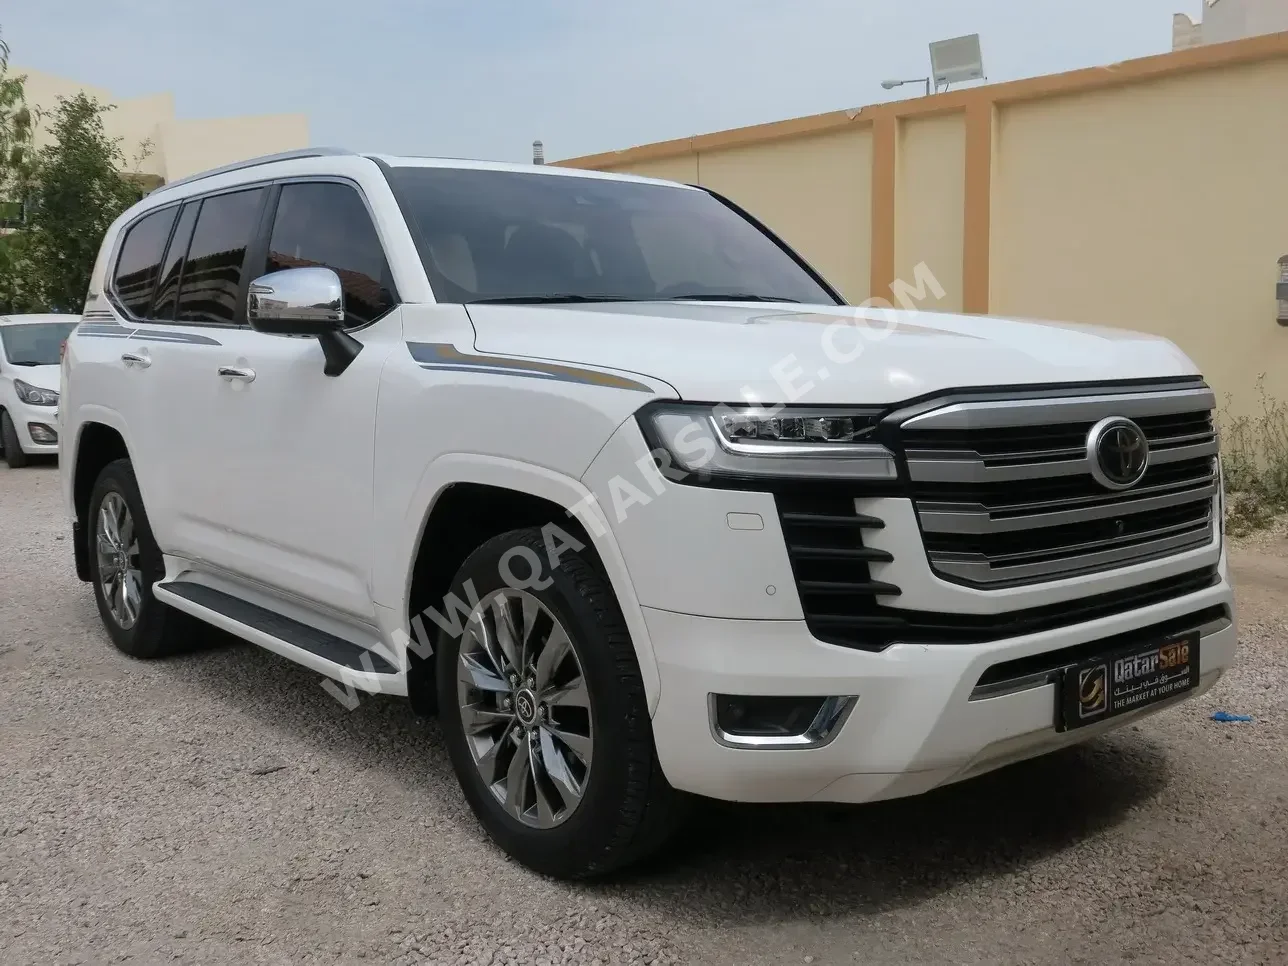 Toyota  Land Cruiser  VXR Twin Turbo  2022  Automatic  105,000 Km  6 Cylinder  Four Wheel Drive (4WD)  SUV  White